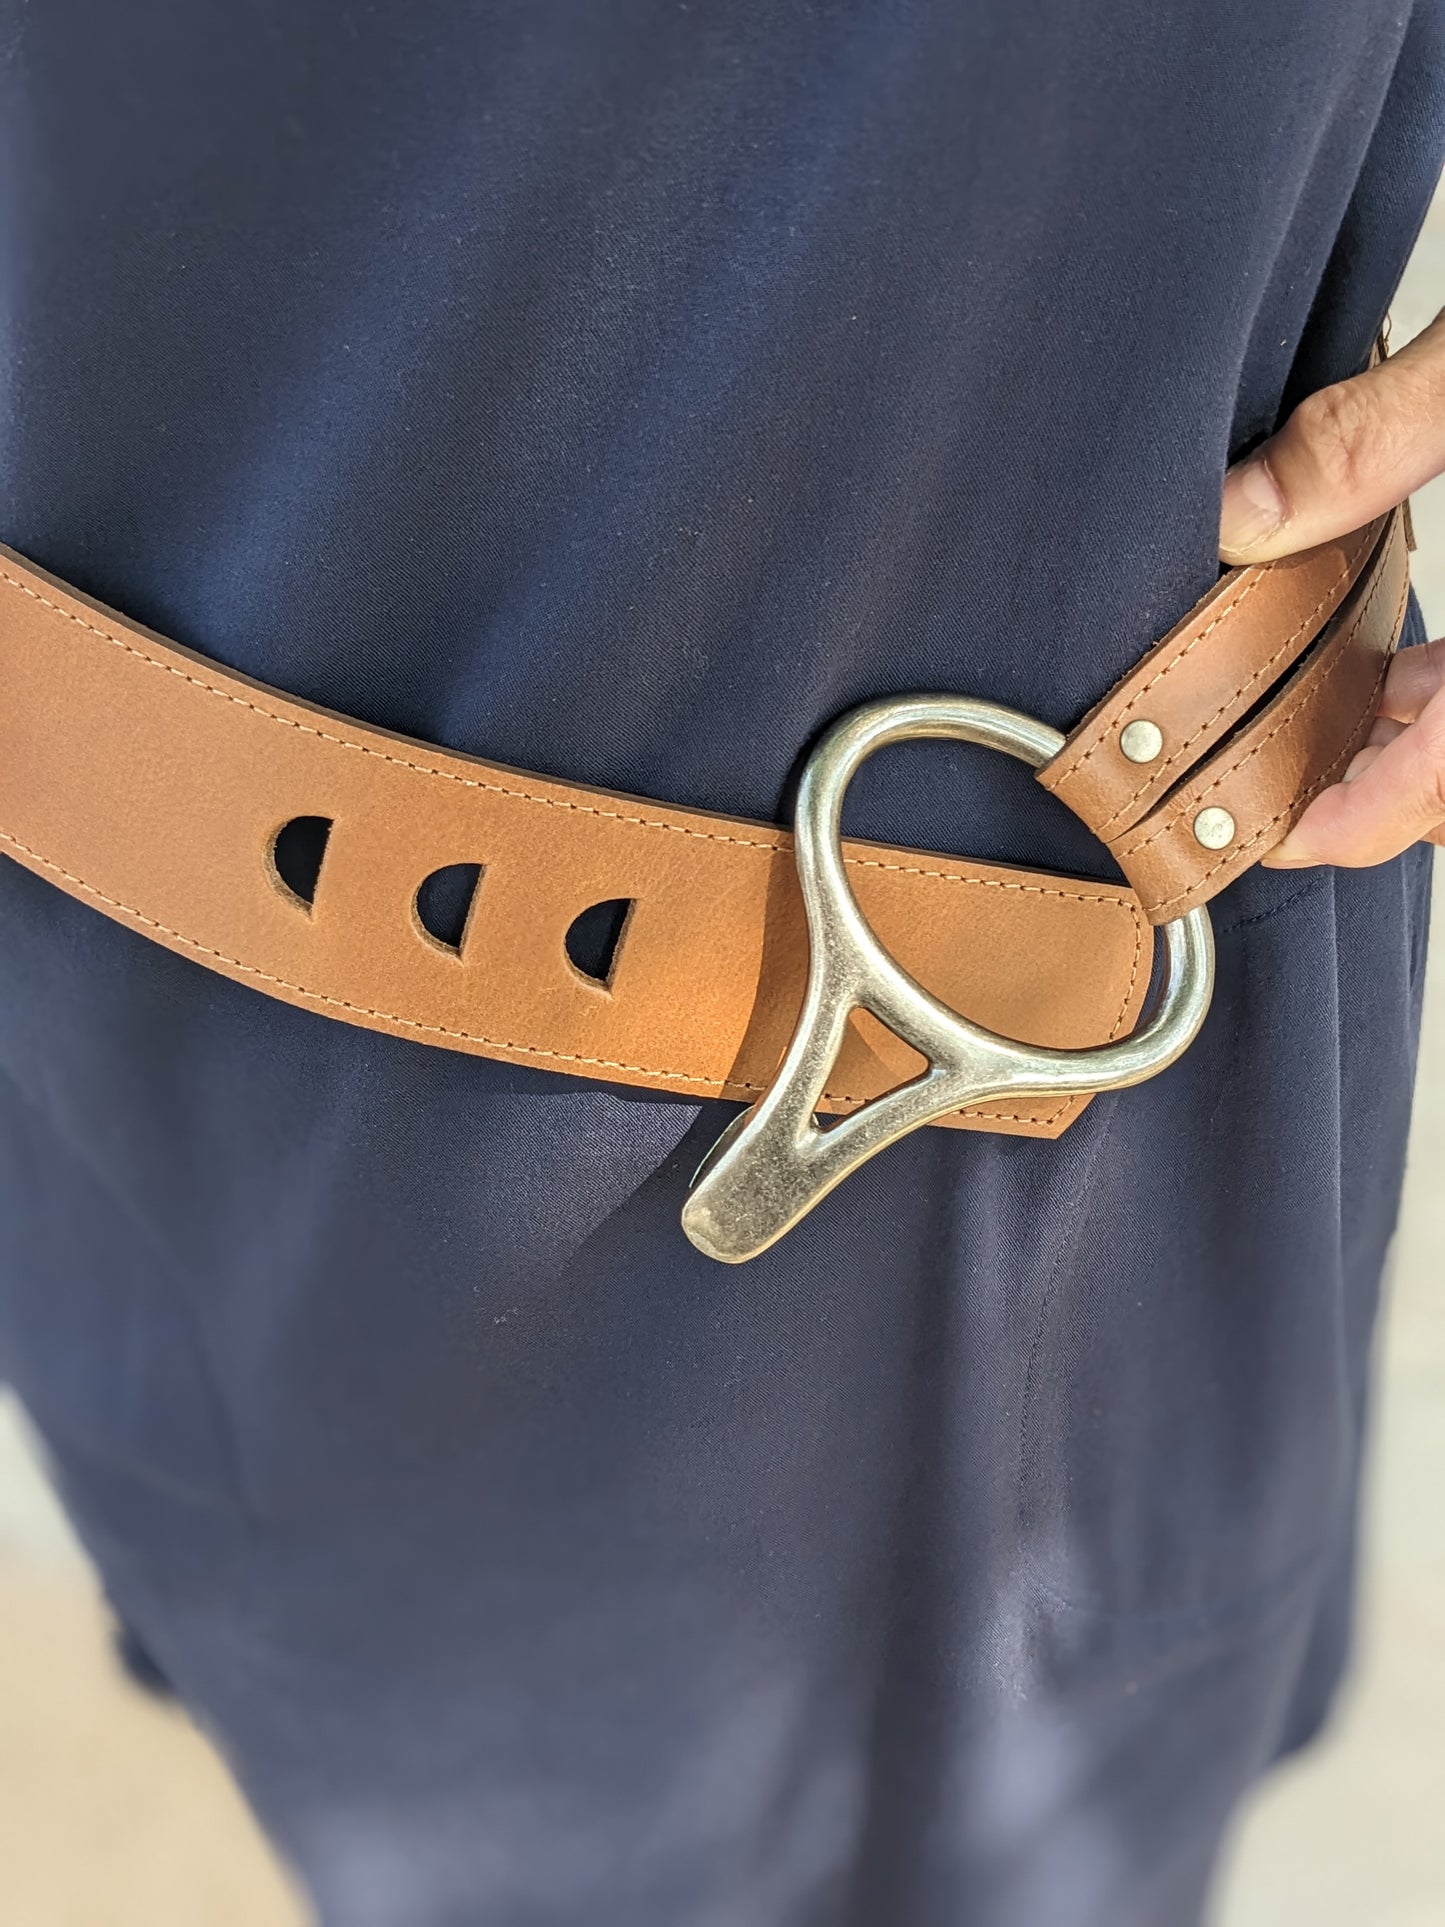 BROWN LEATHER BELT WITH SILVER HOOK BUCKLE